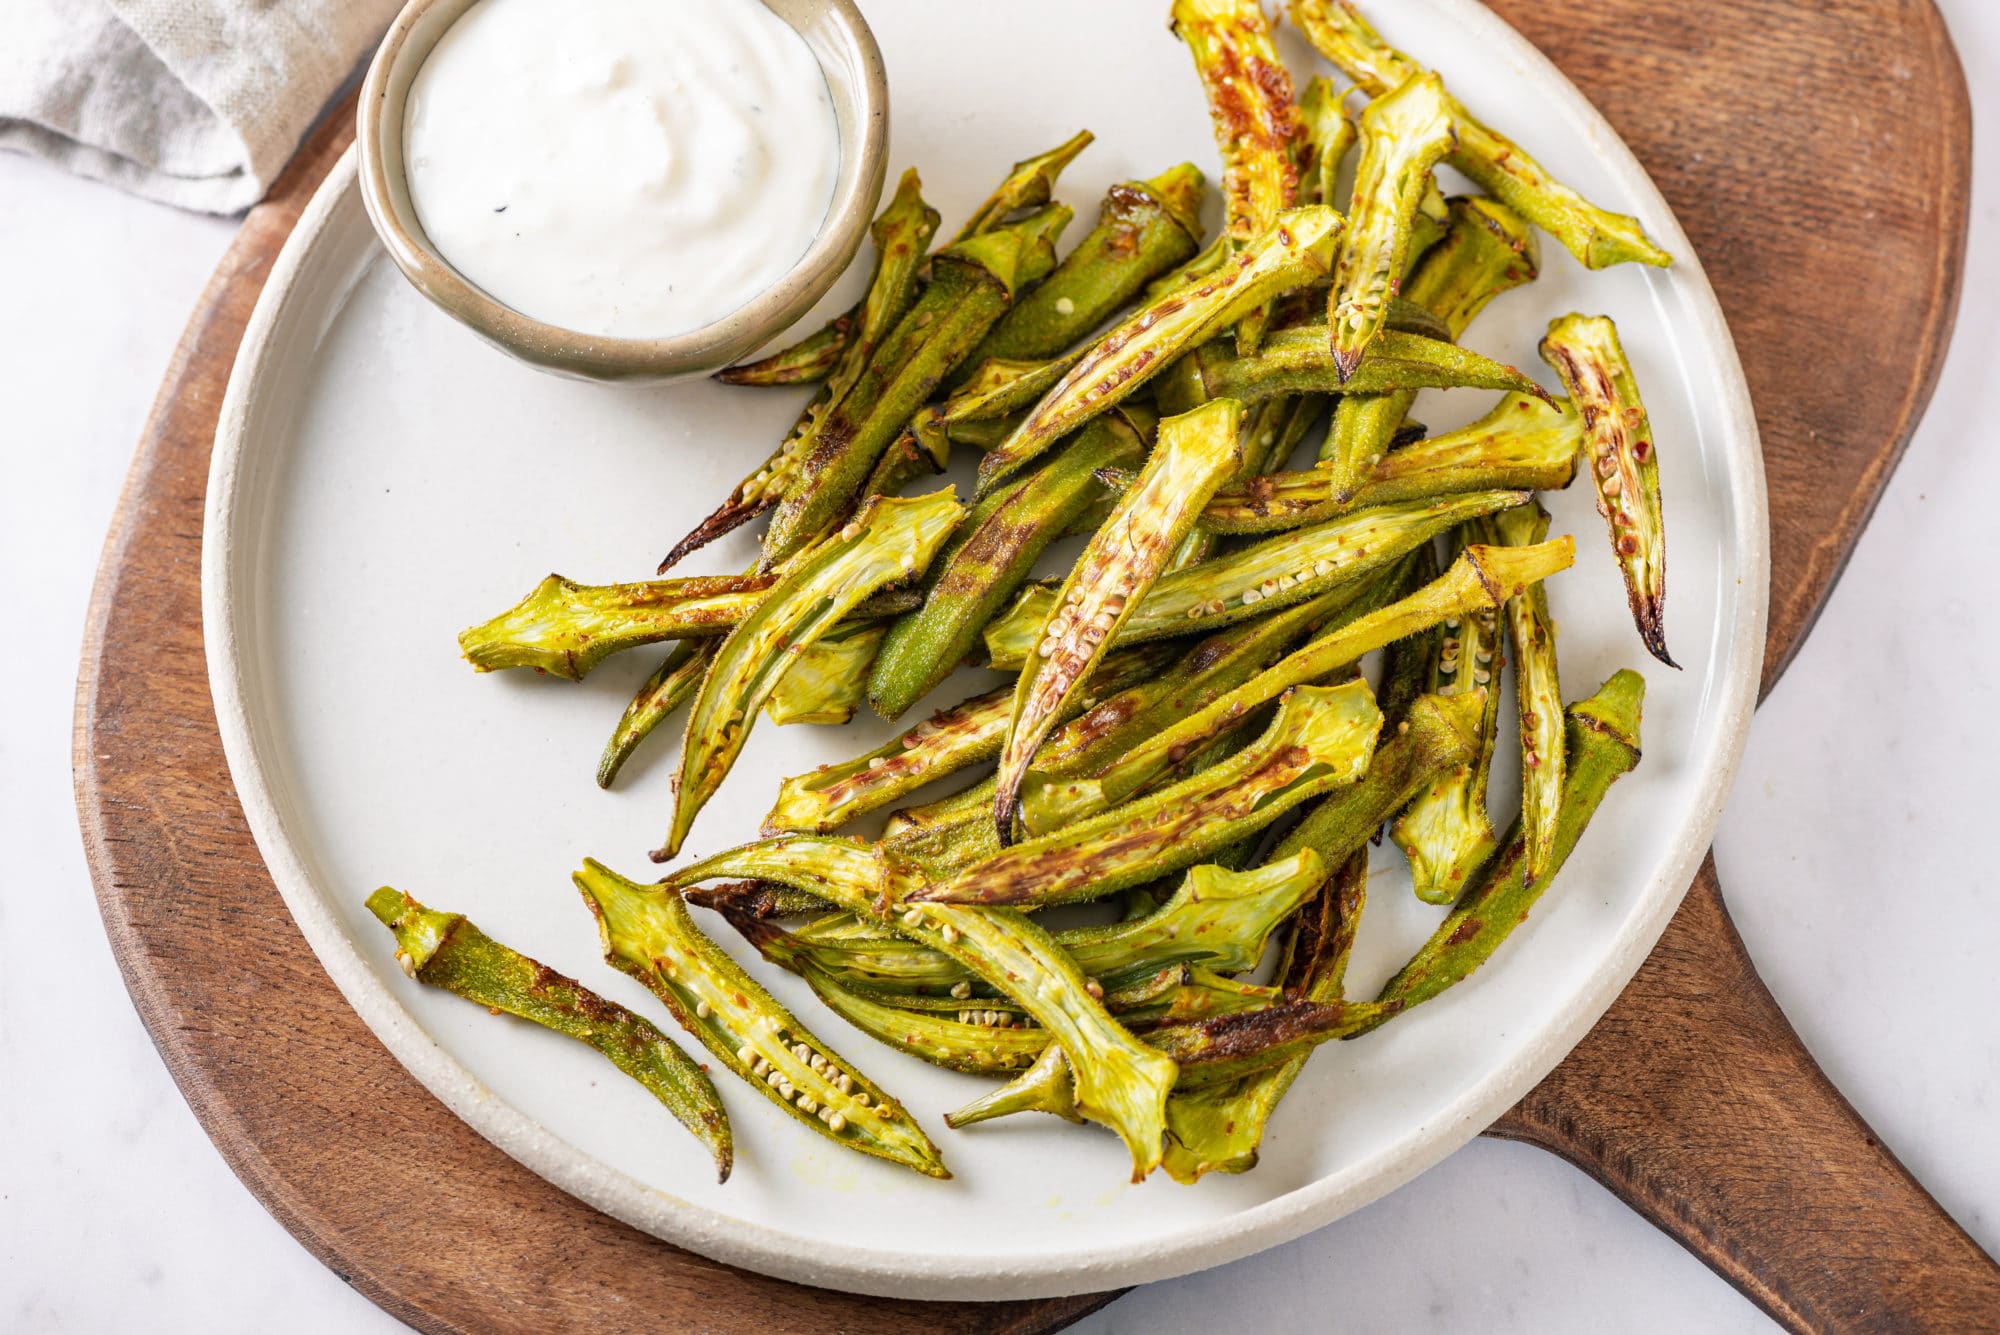 roasted-okra-on-a-white-plate-and-a-wooden-board-with-a-bowl-of-dip-on-the-side